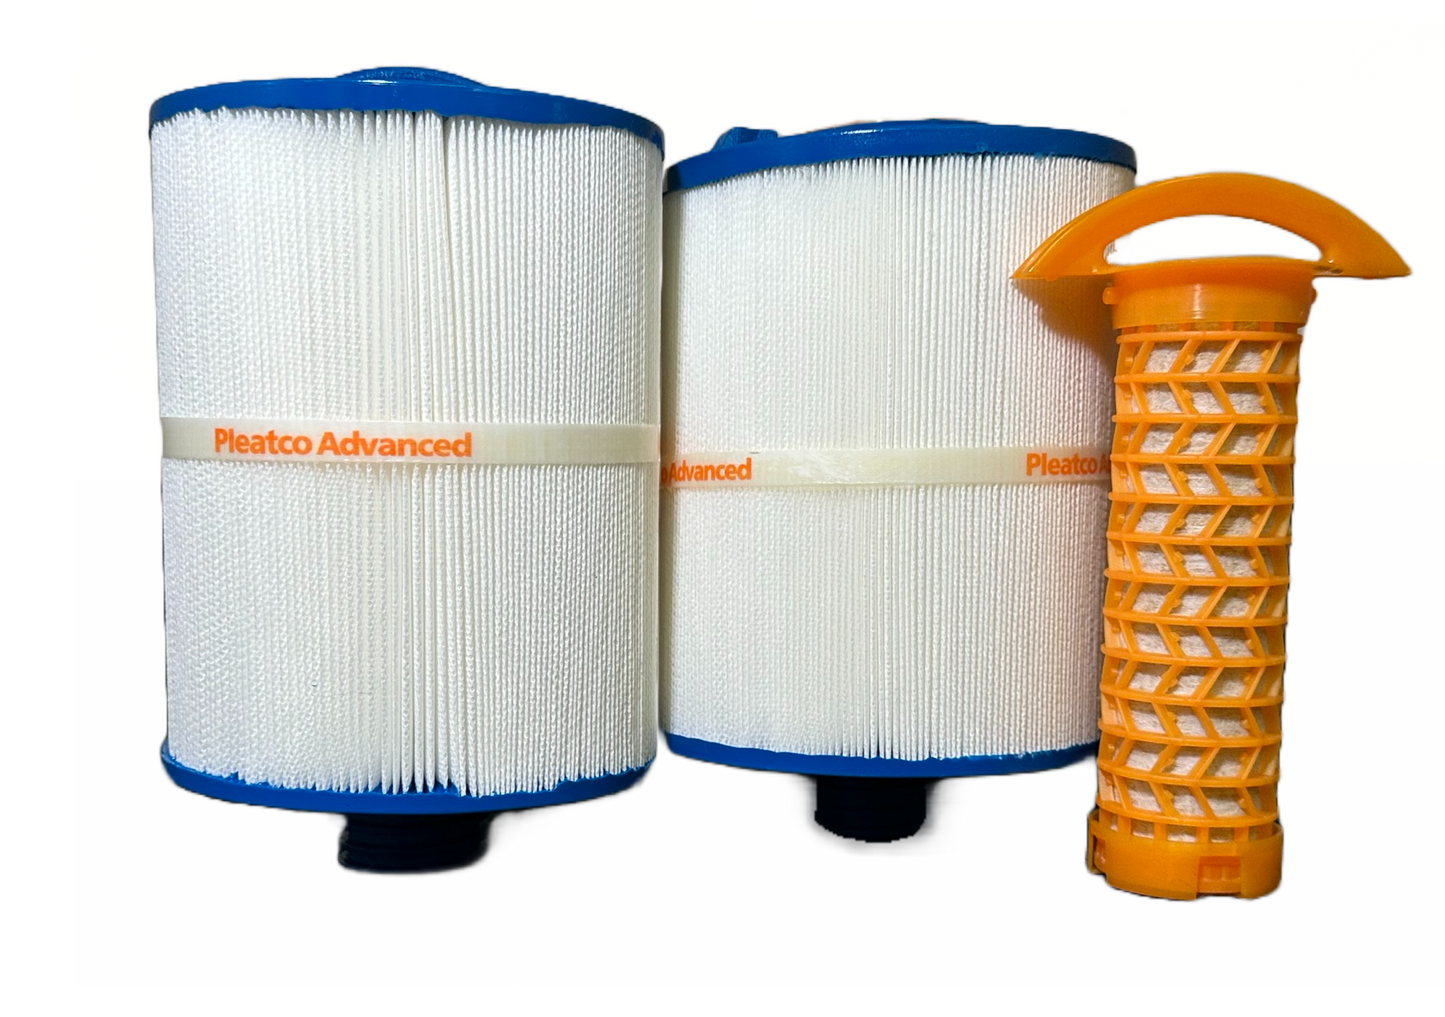 Filter Set - 3 Filter Set for H2X Trainer & Challenger/Michael Phelps Swim Spa Filters